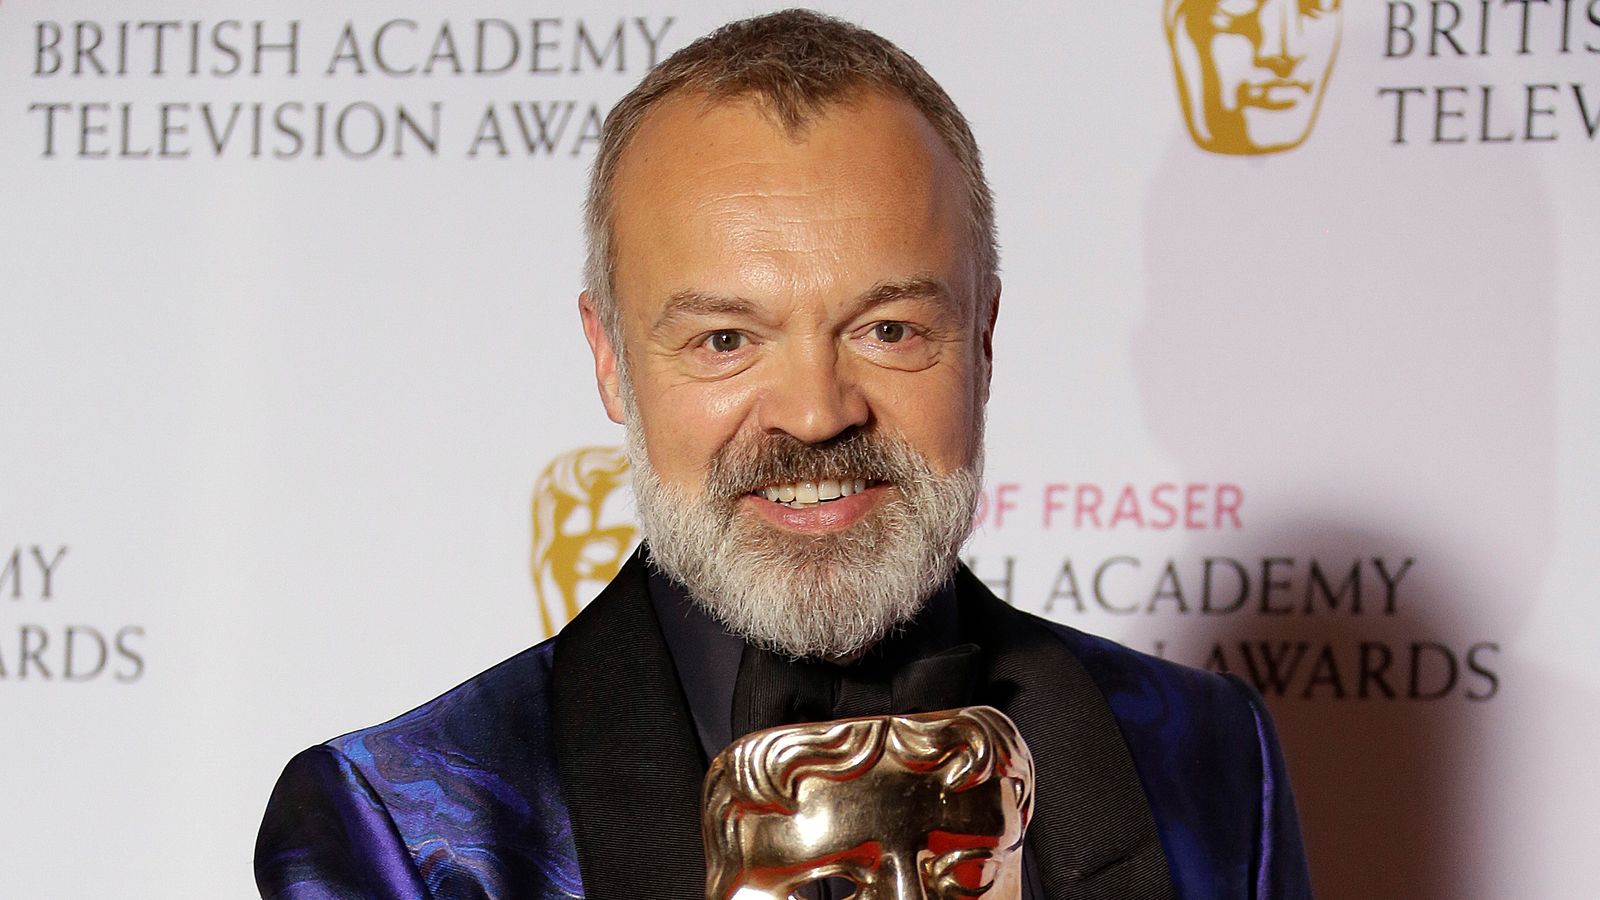 Graham Norton to host Wheel Of Fortune as 'iconic' game show makes return